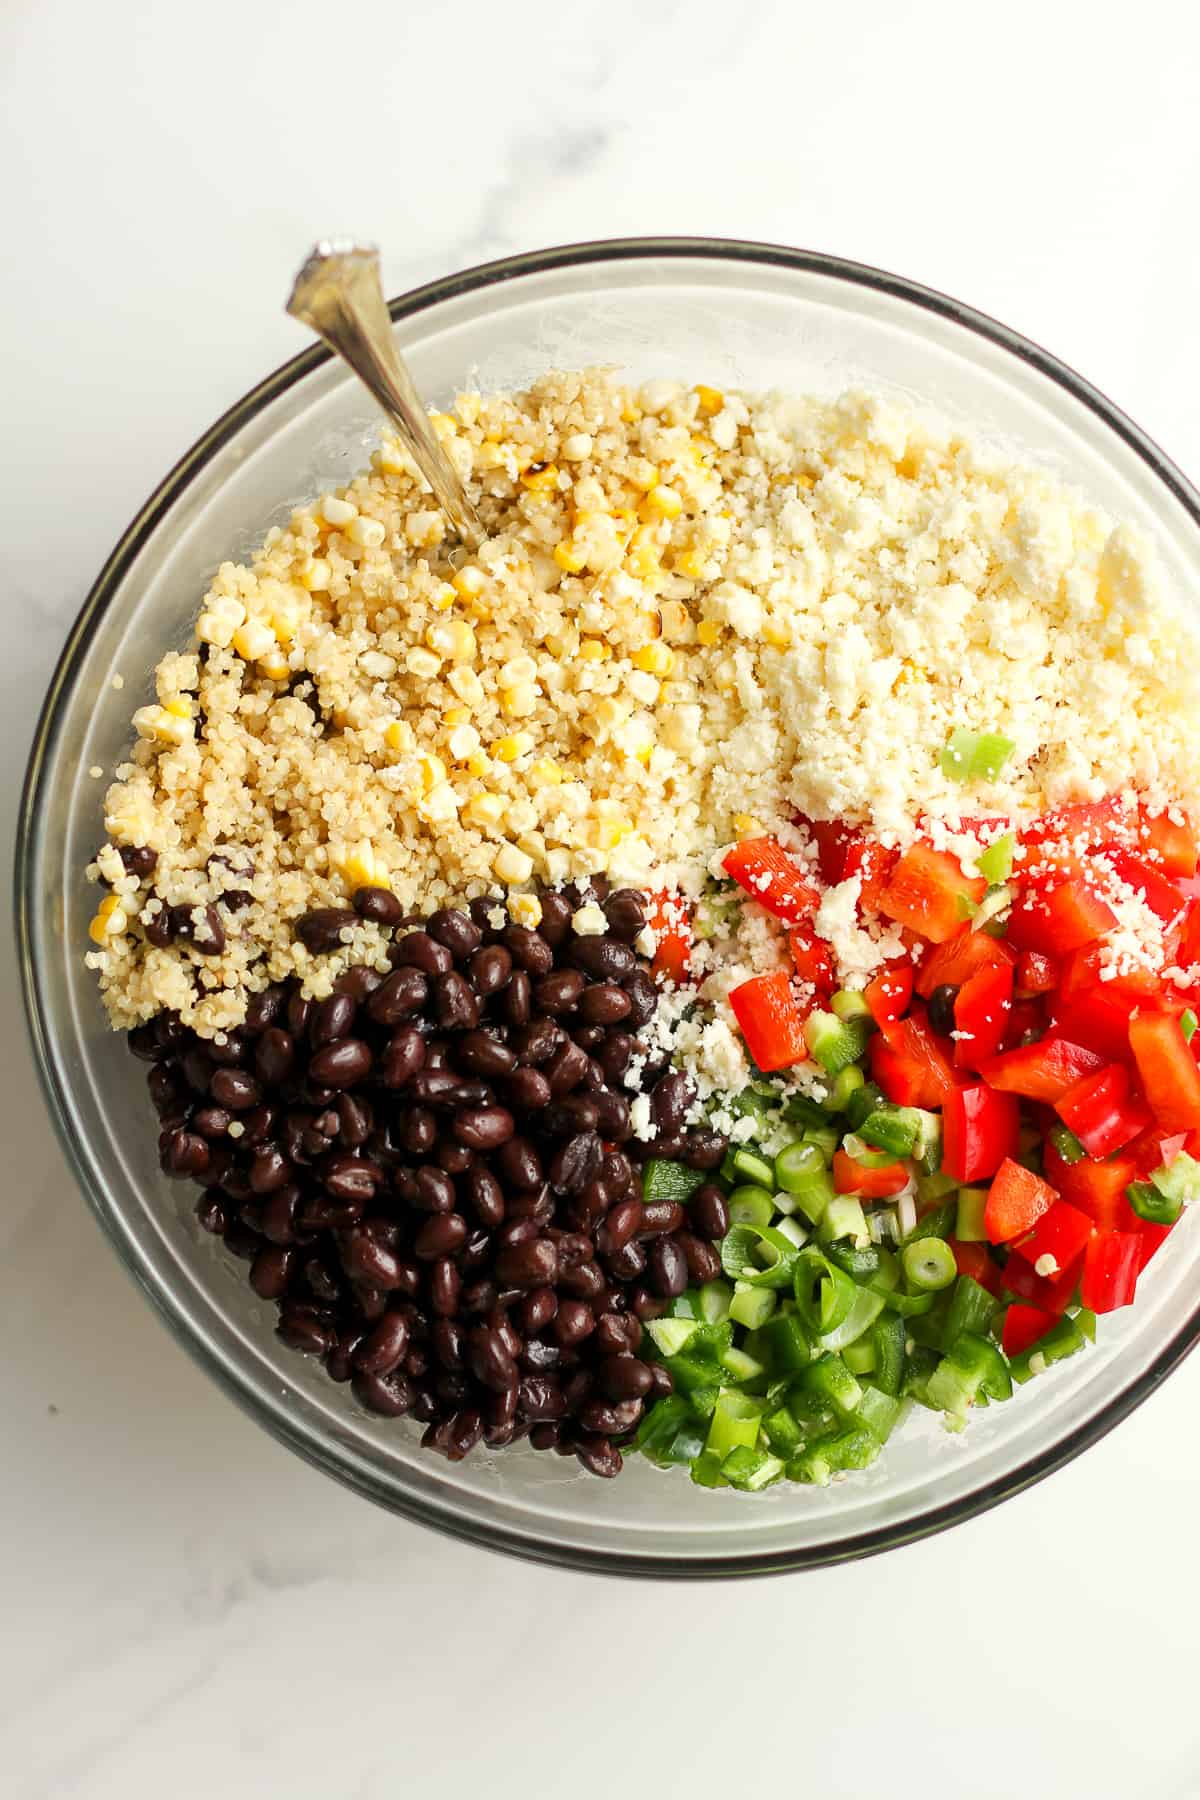 A bowl of the quinoa with the ingredients on top.